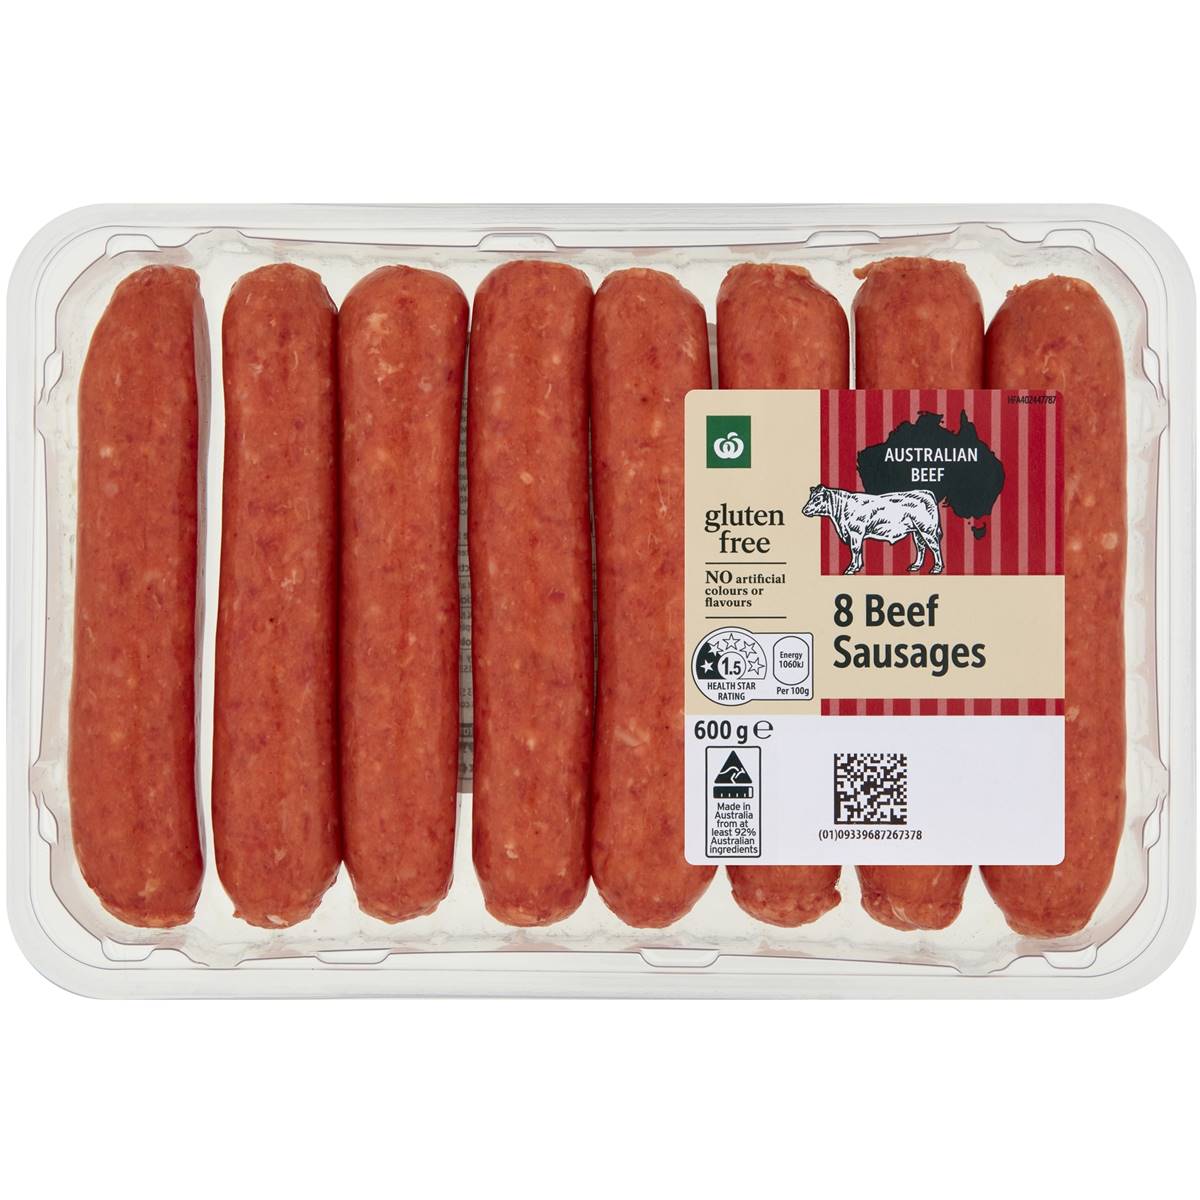 Calories in Woolworths 8 Beef Sausages